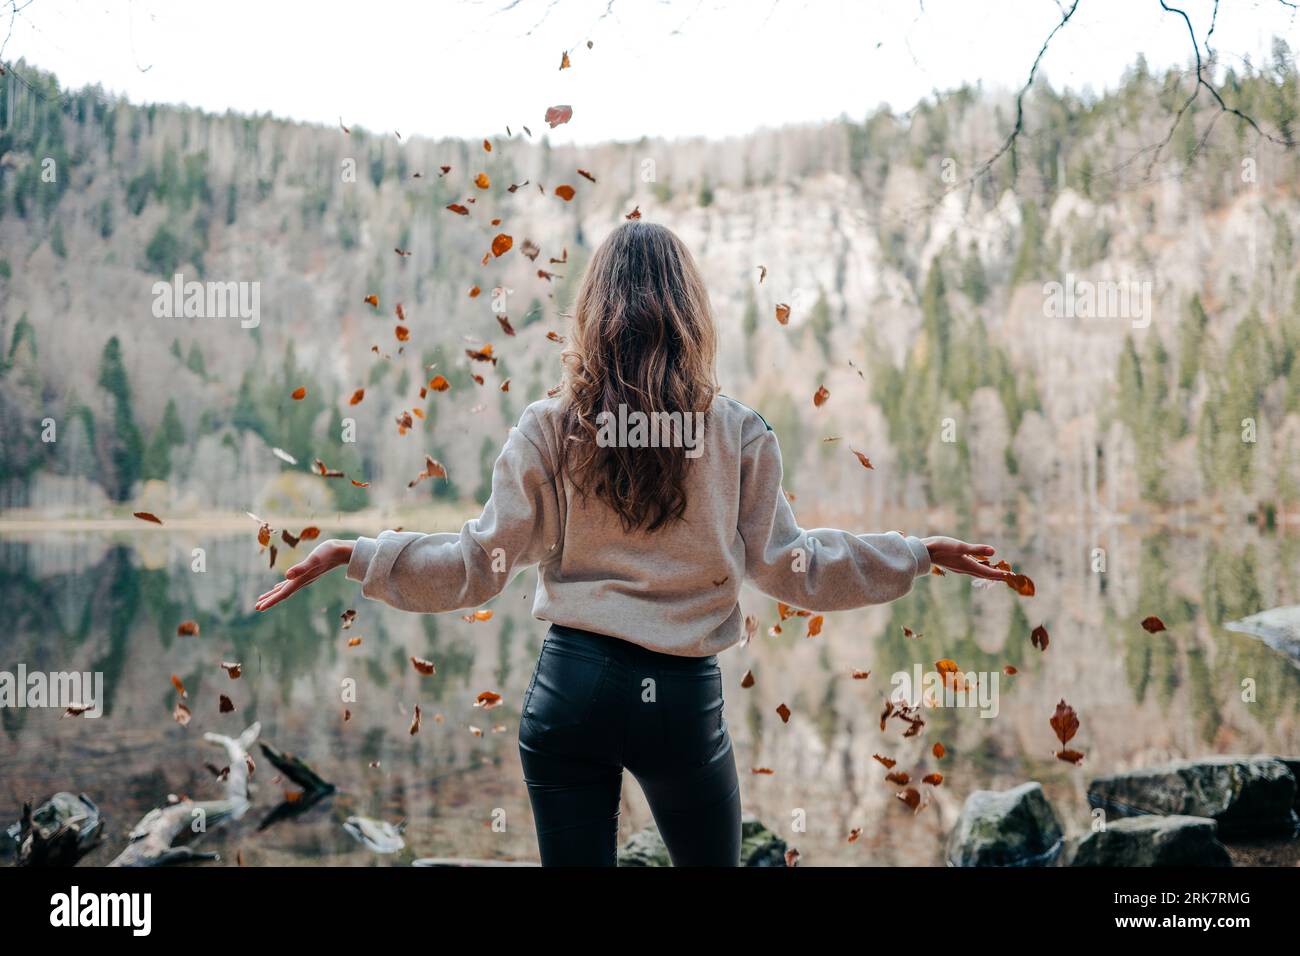 A young woman wearing tight jeans and a sweater, standing in front of a lake, throwing leaves. Stock Photo